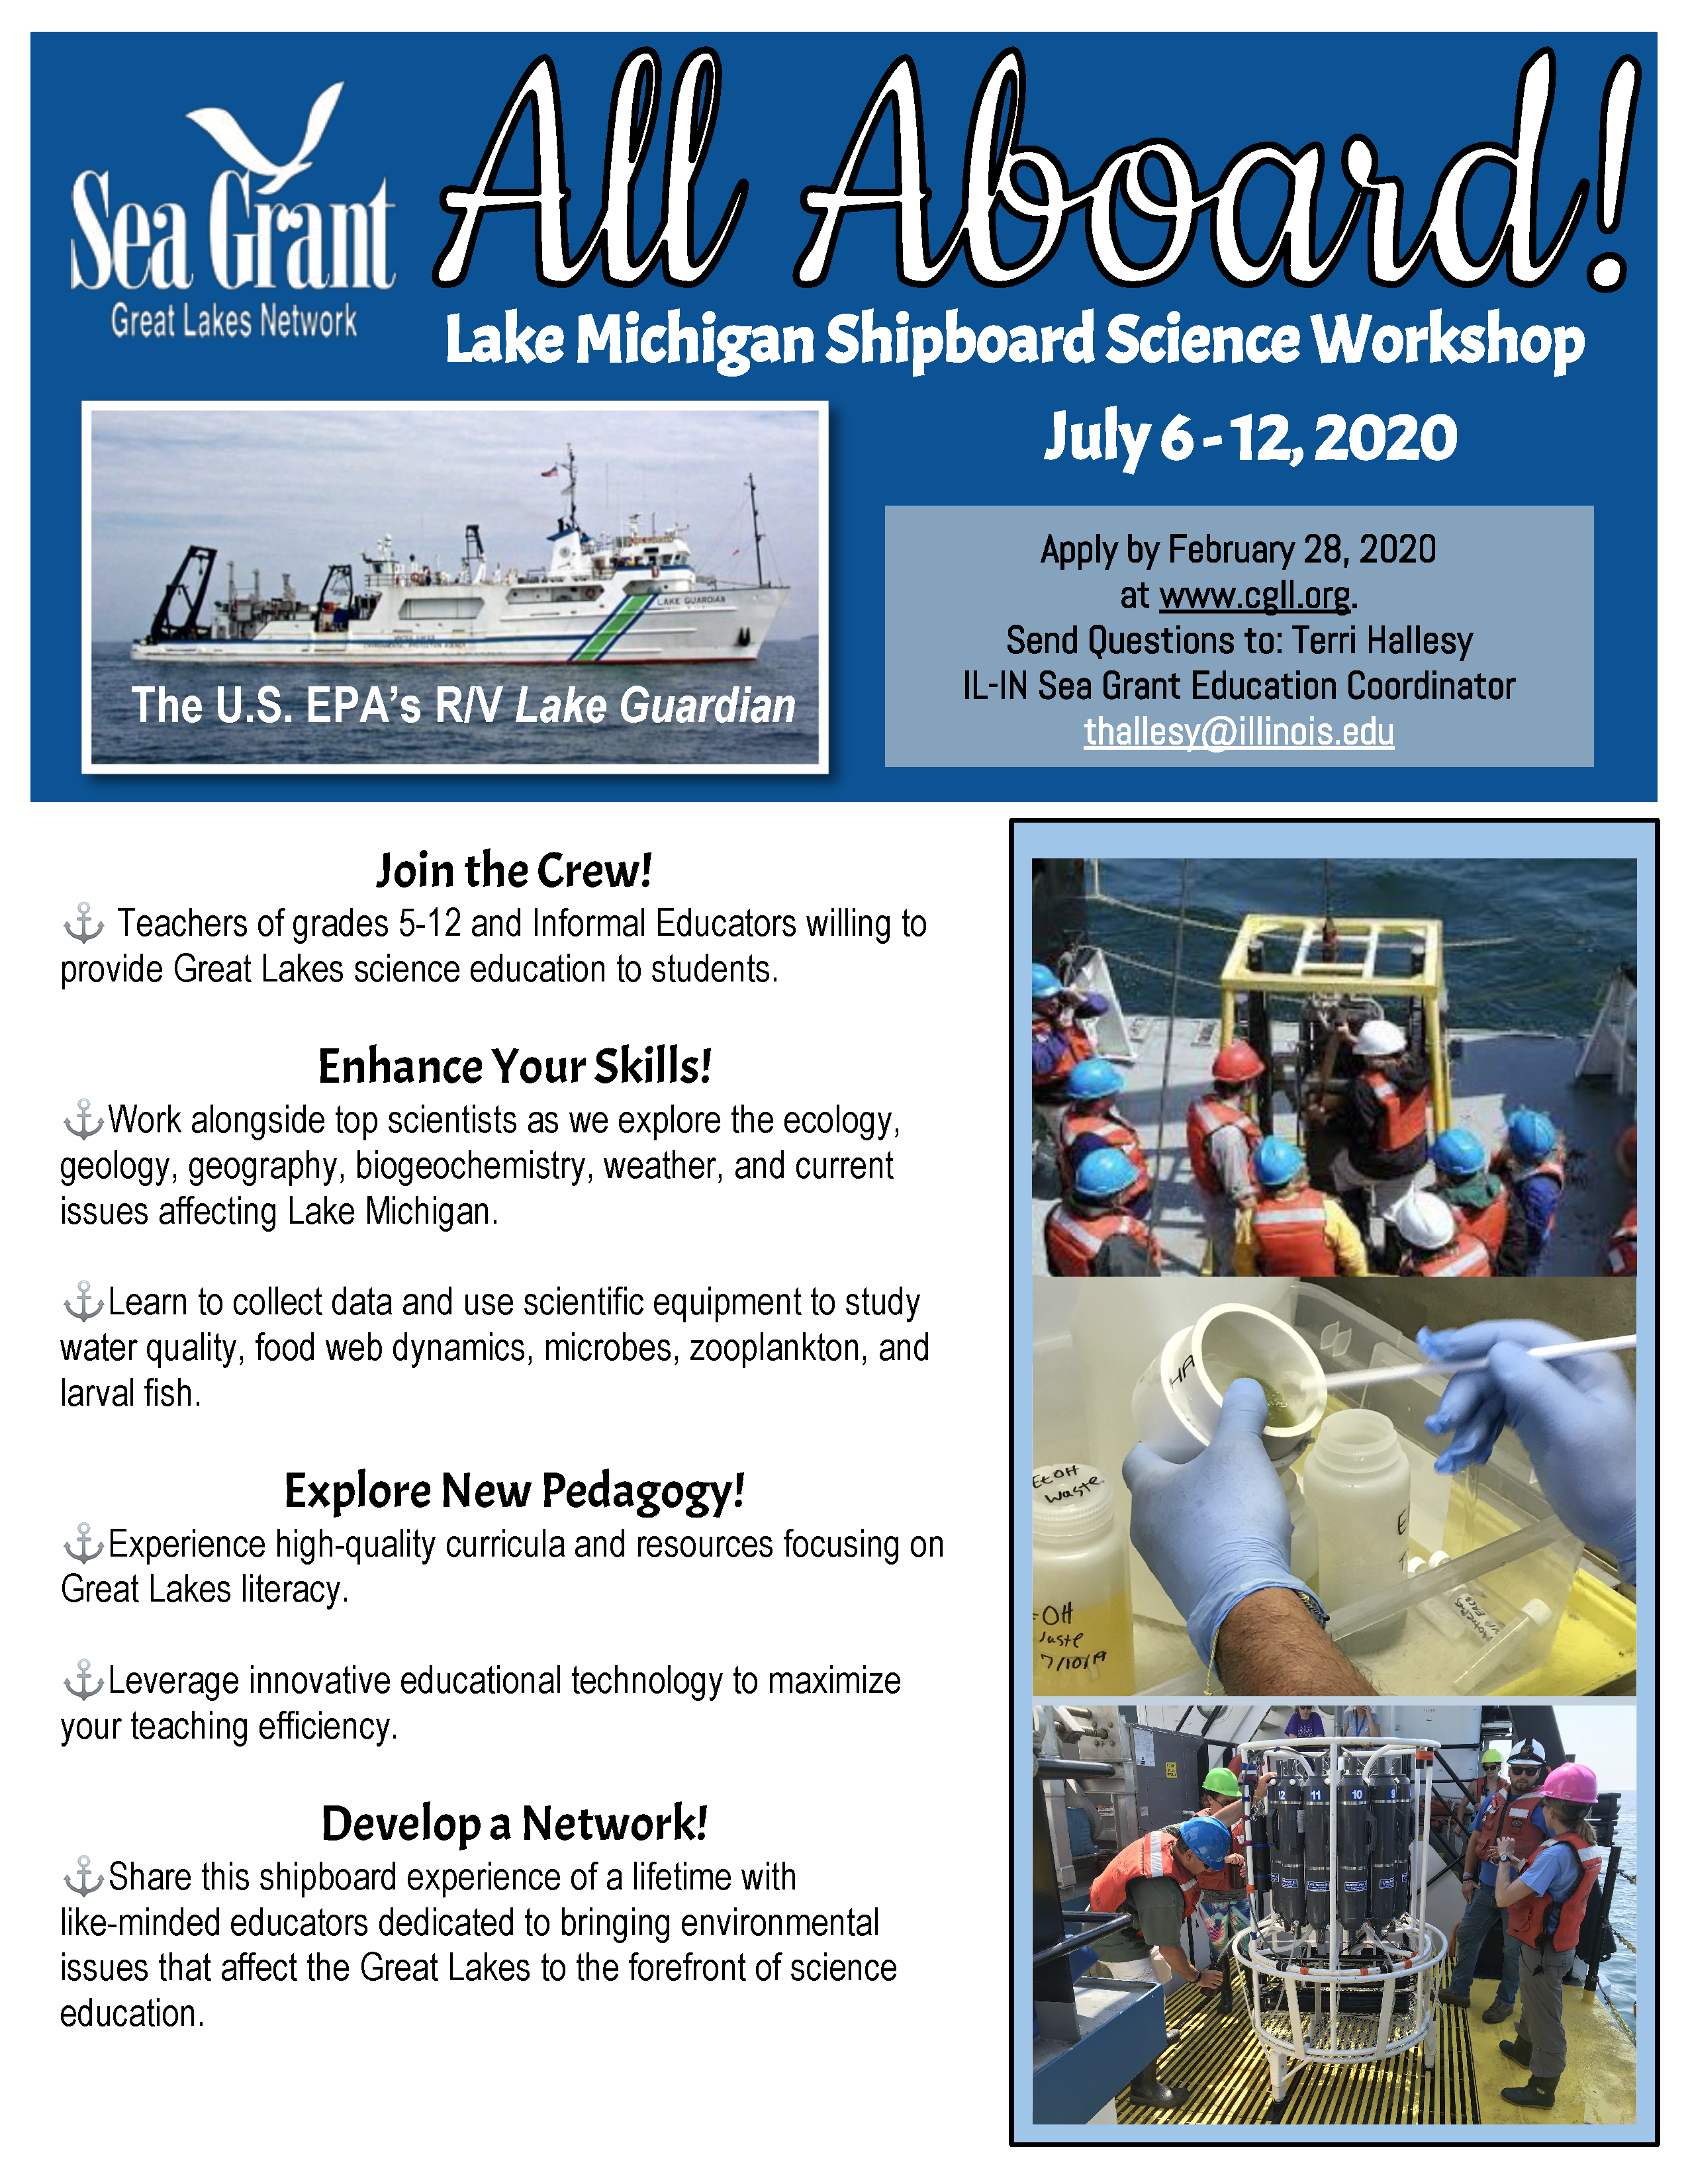 flyer with more workshop info, including trip logistics. Contact Terri Hallesy at thallesy@illinois.edu for details